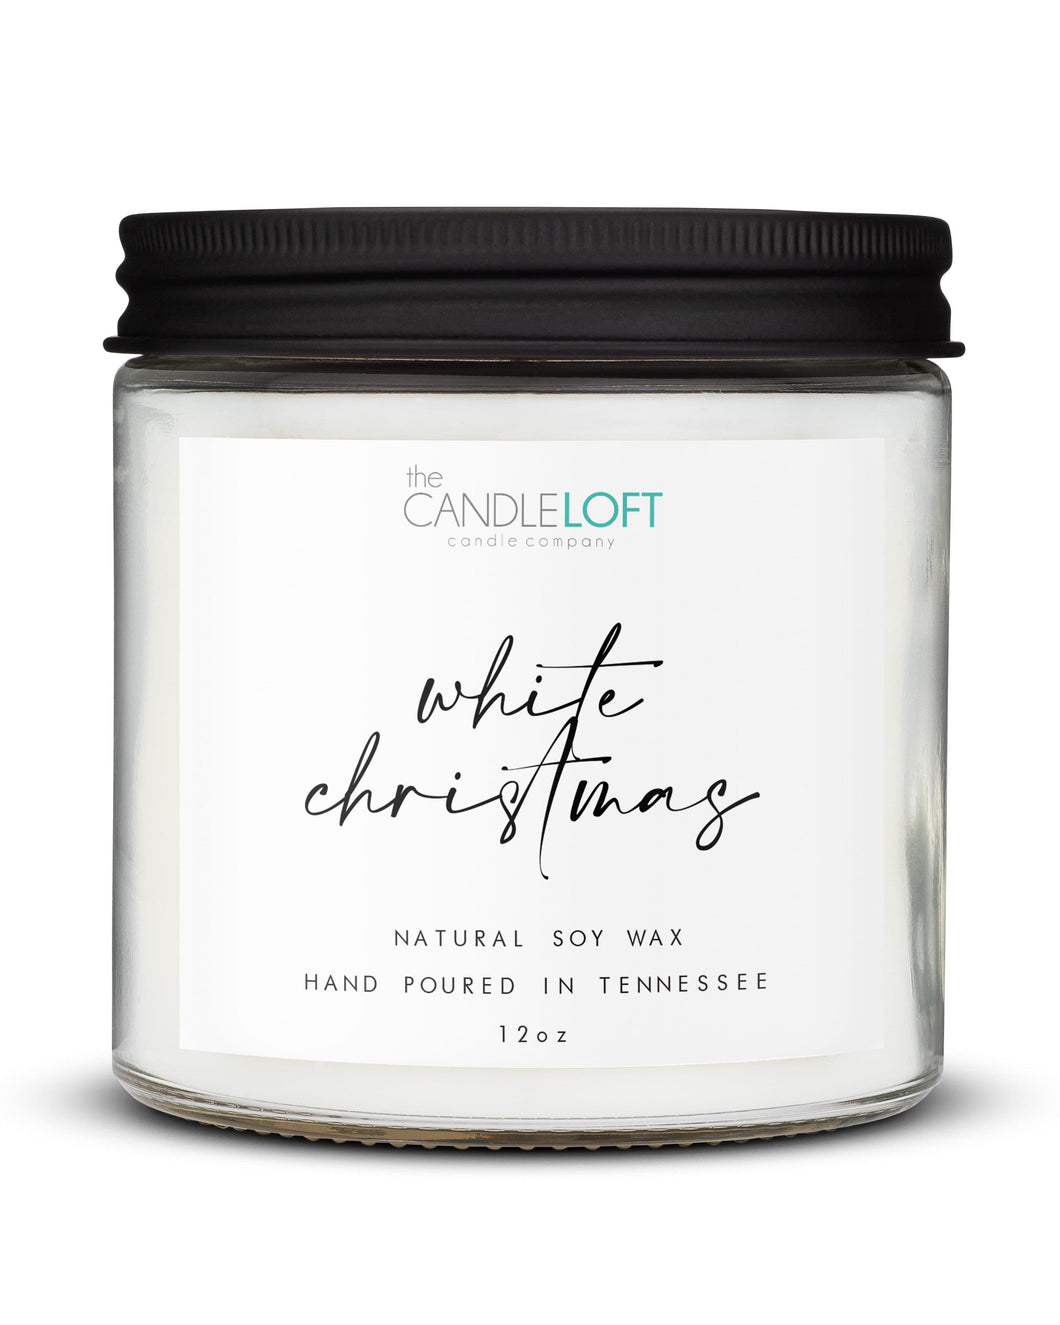 The Candle Loft Candles Signature 12oz White Christmas Candle